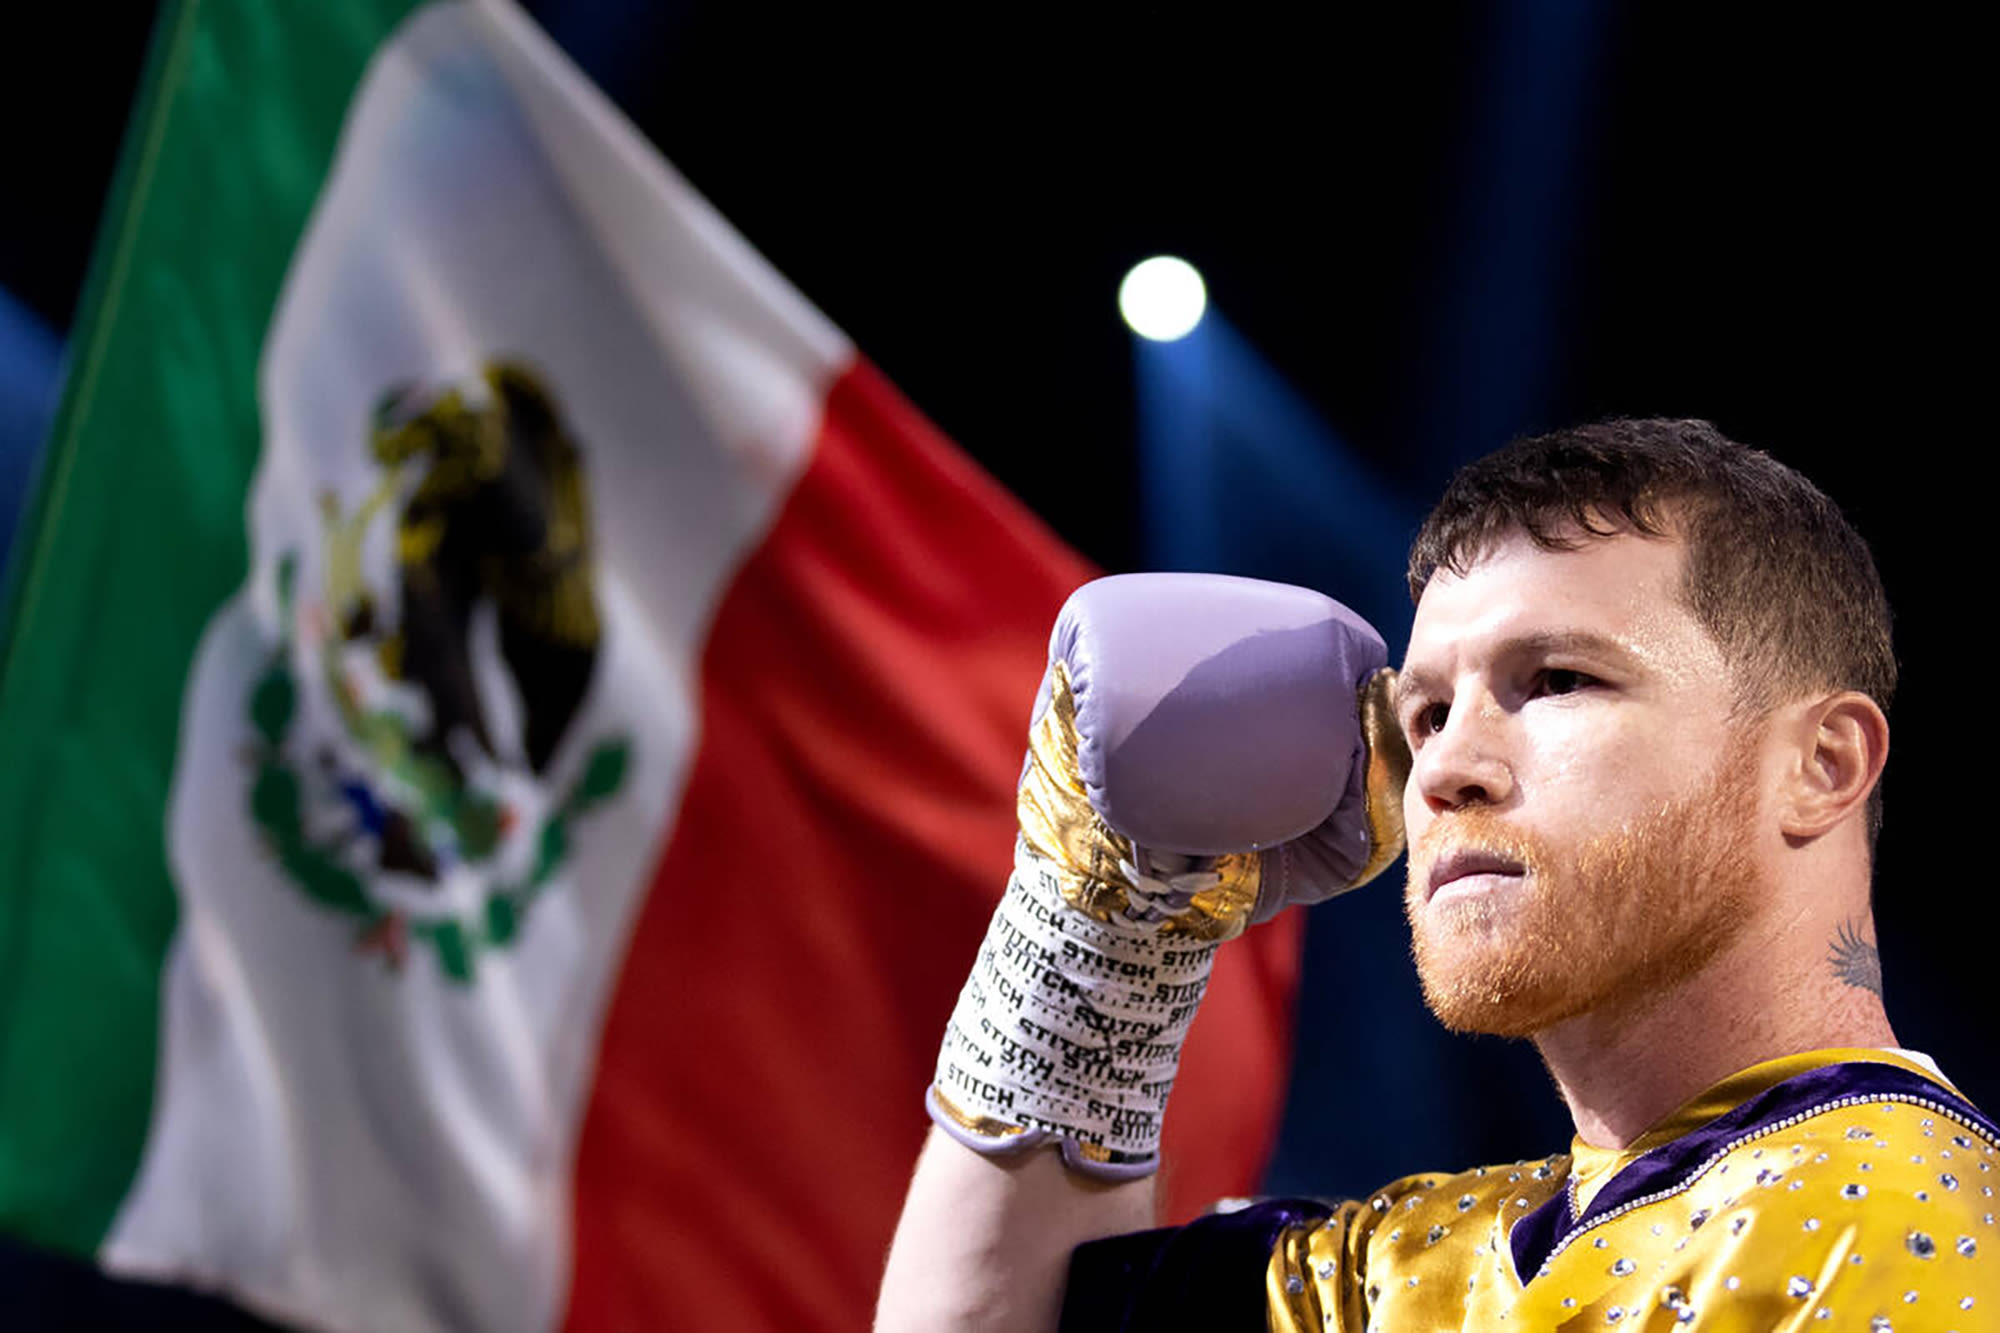 How to watch the Canelo Álvarez vs. Jaime Munguía fight: Full card, where to stream and more